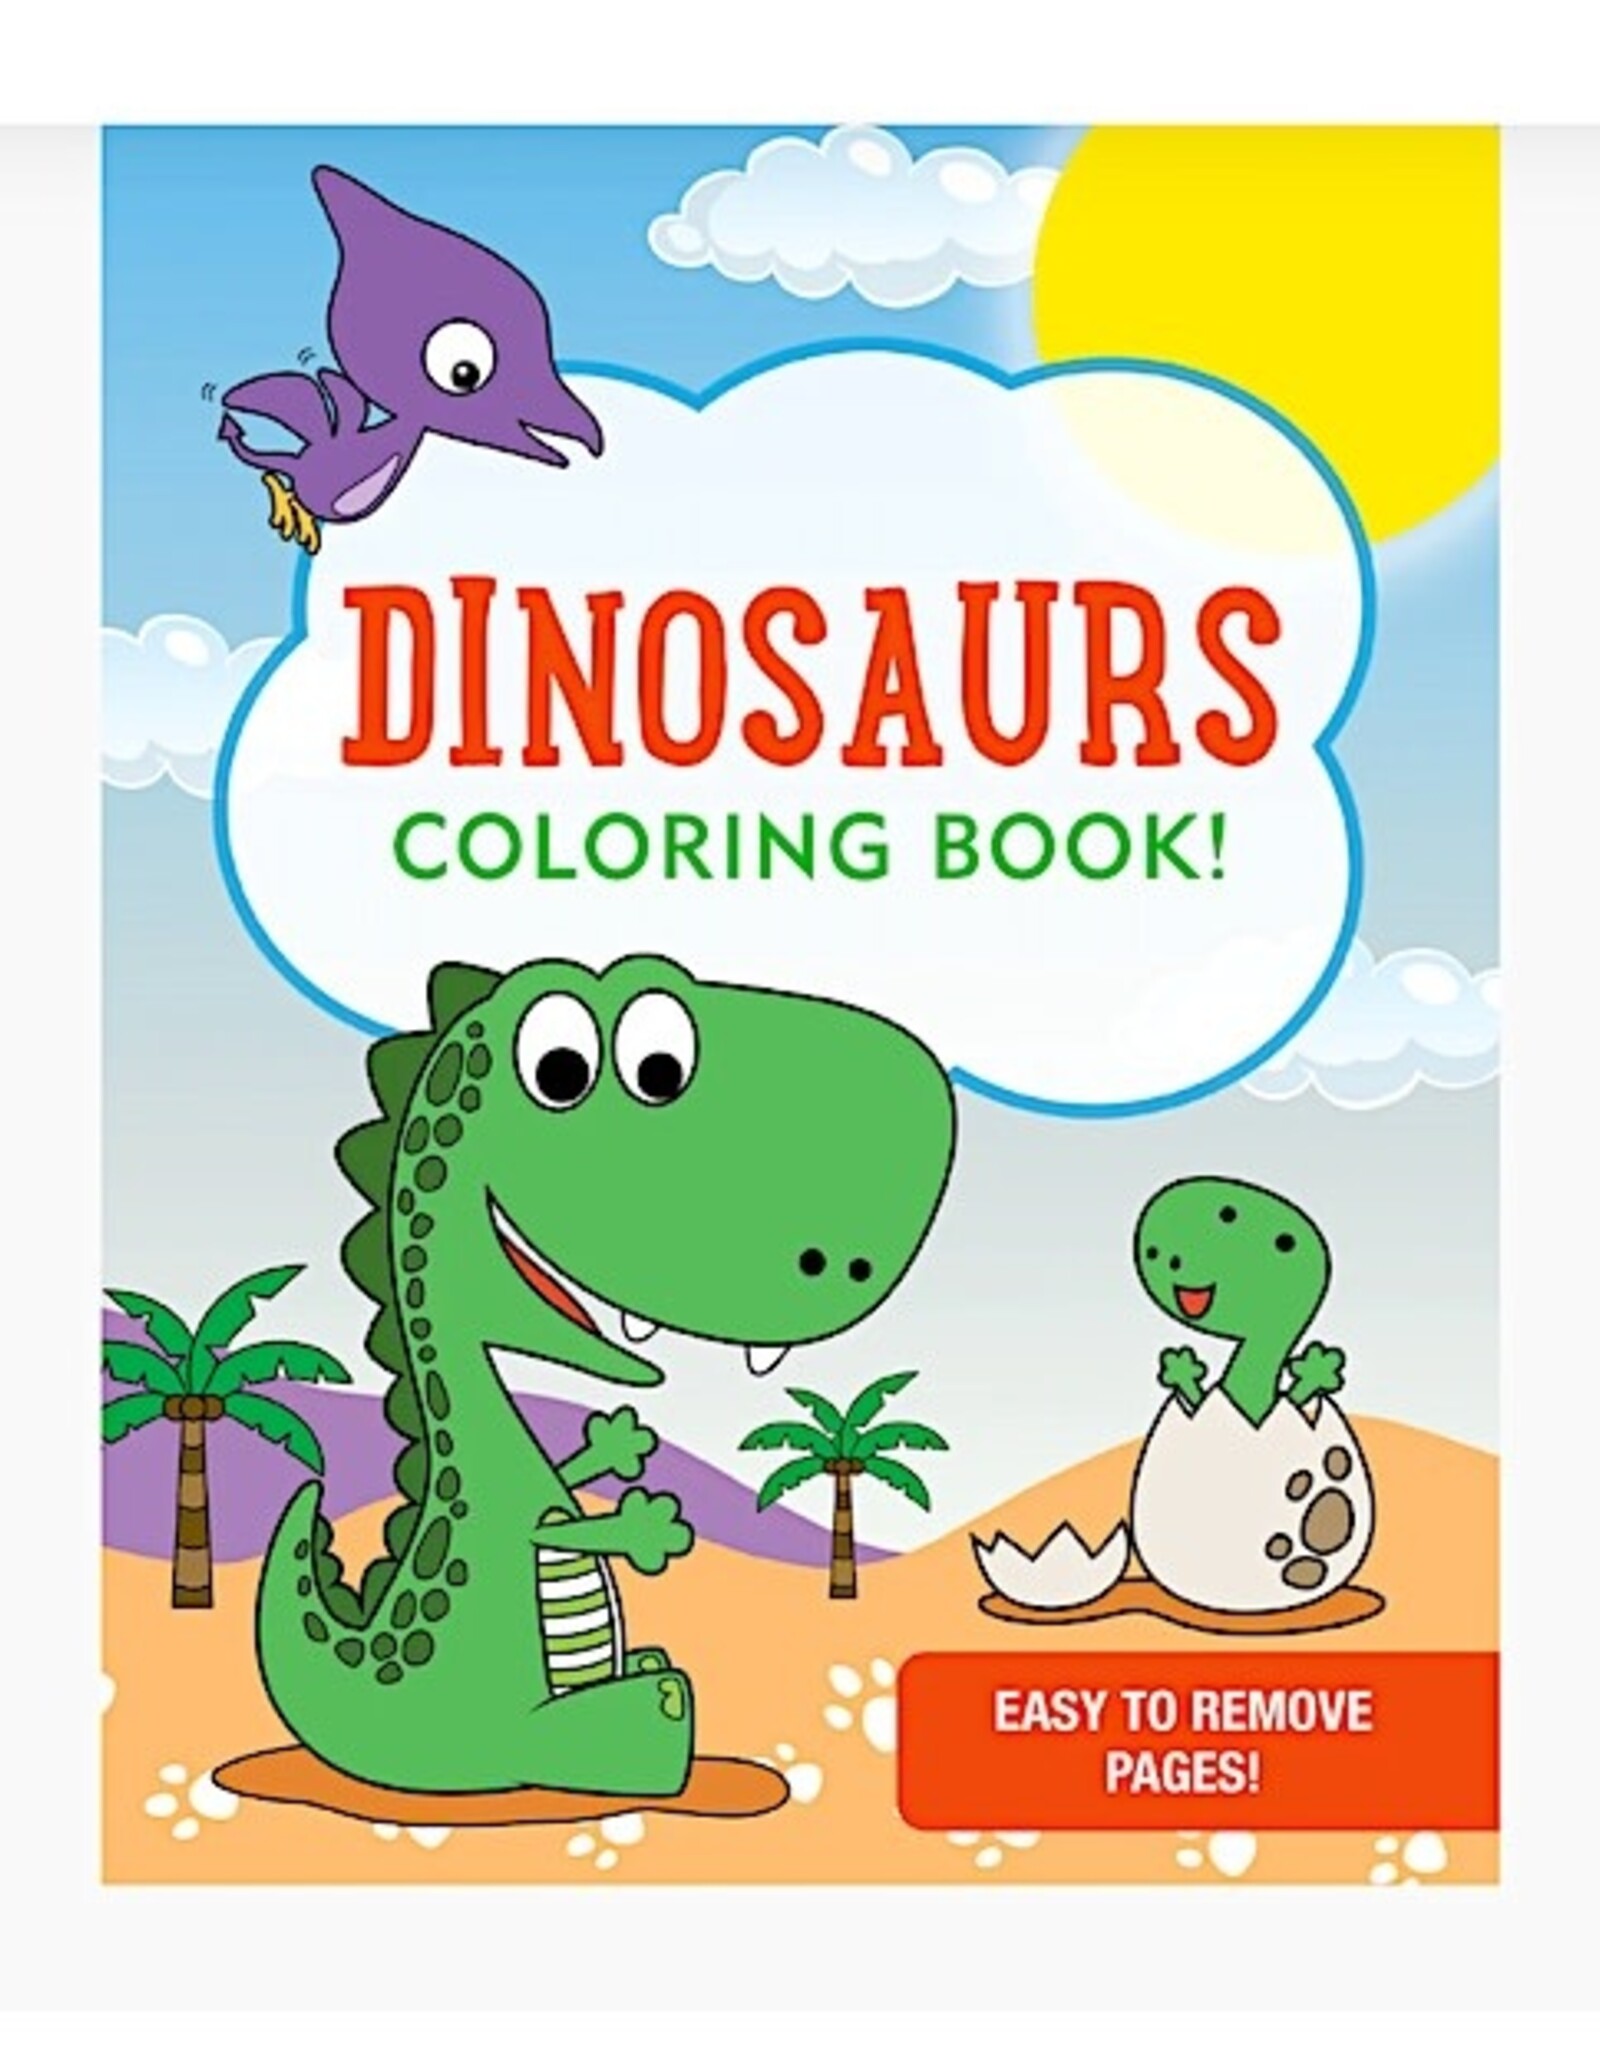 Dinosaurs Coloring Book!